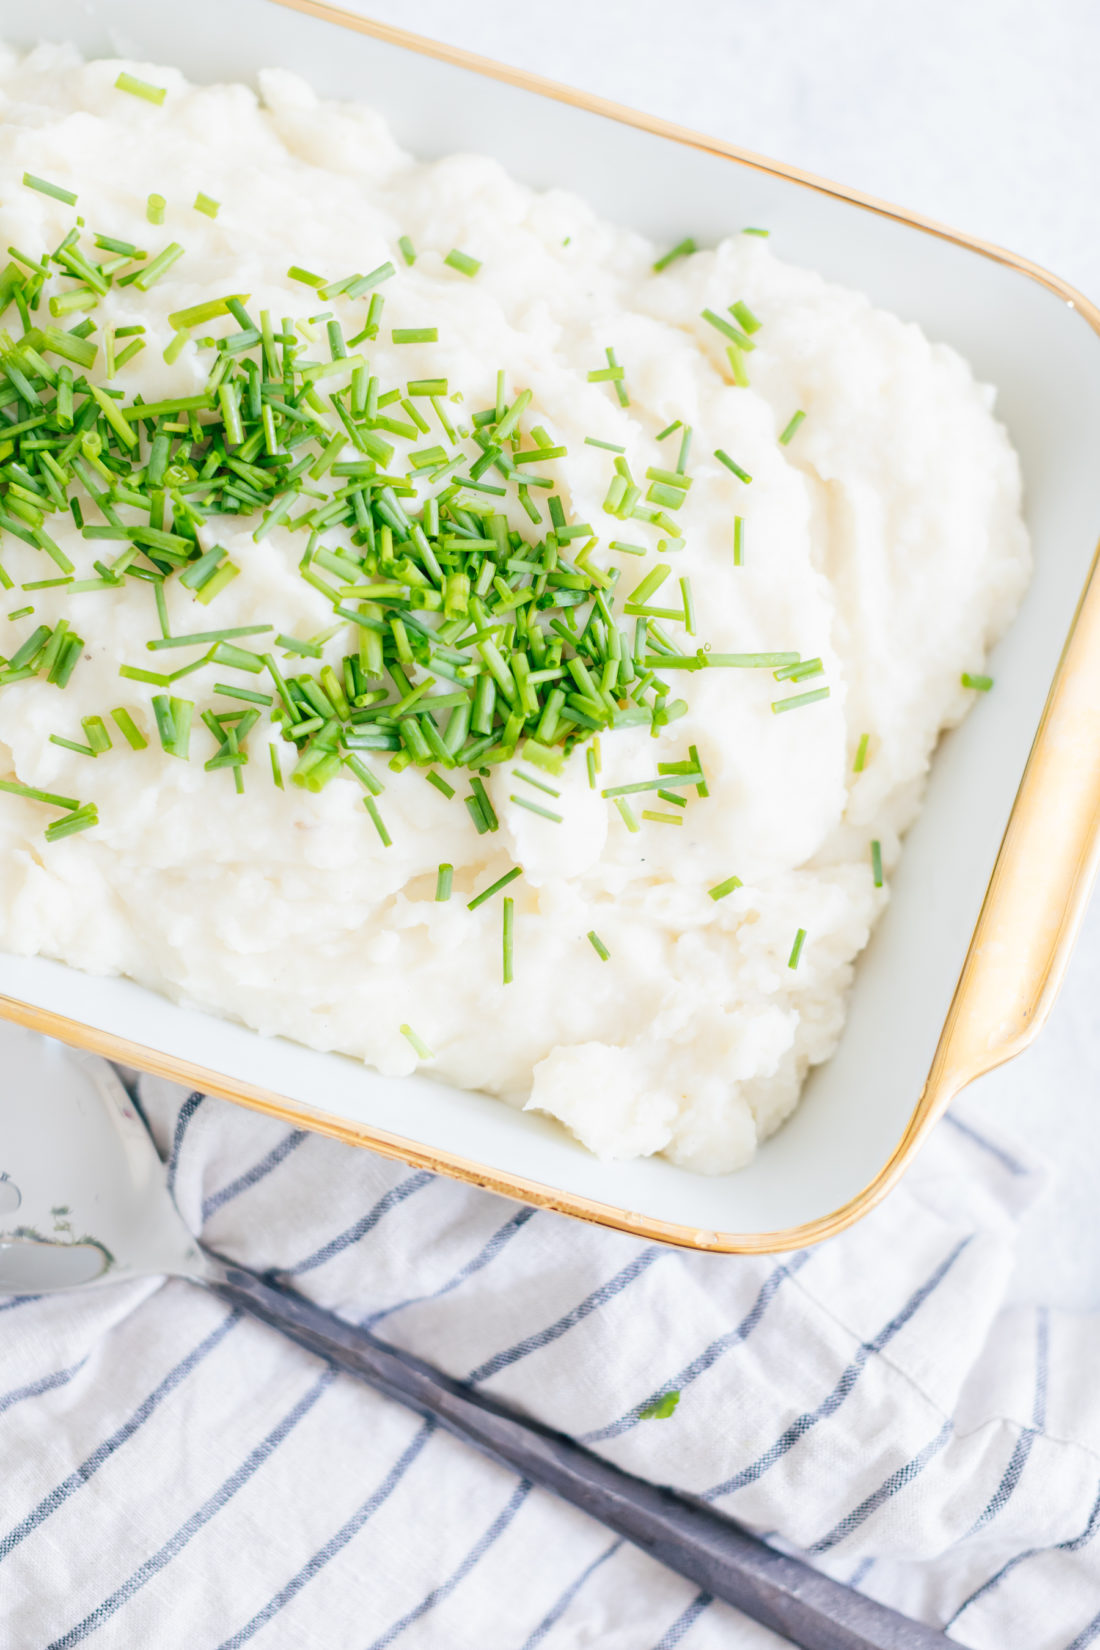 Eva Amurri Martino's Garlicky Goat Cheese & Chive Whipped Potatoes recipe is a great cows milk free Thanksgiving side dish